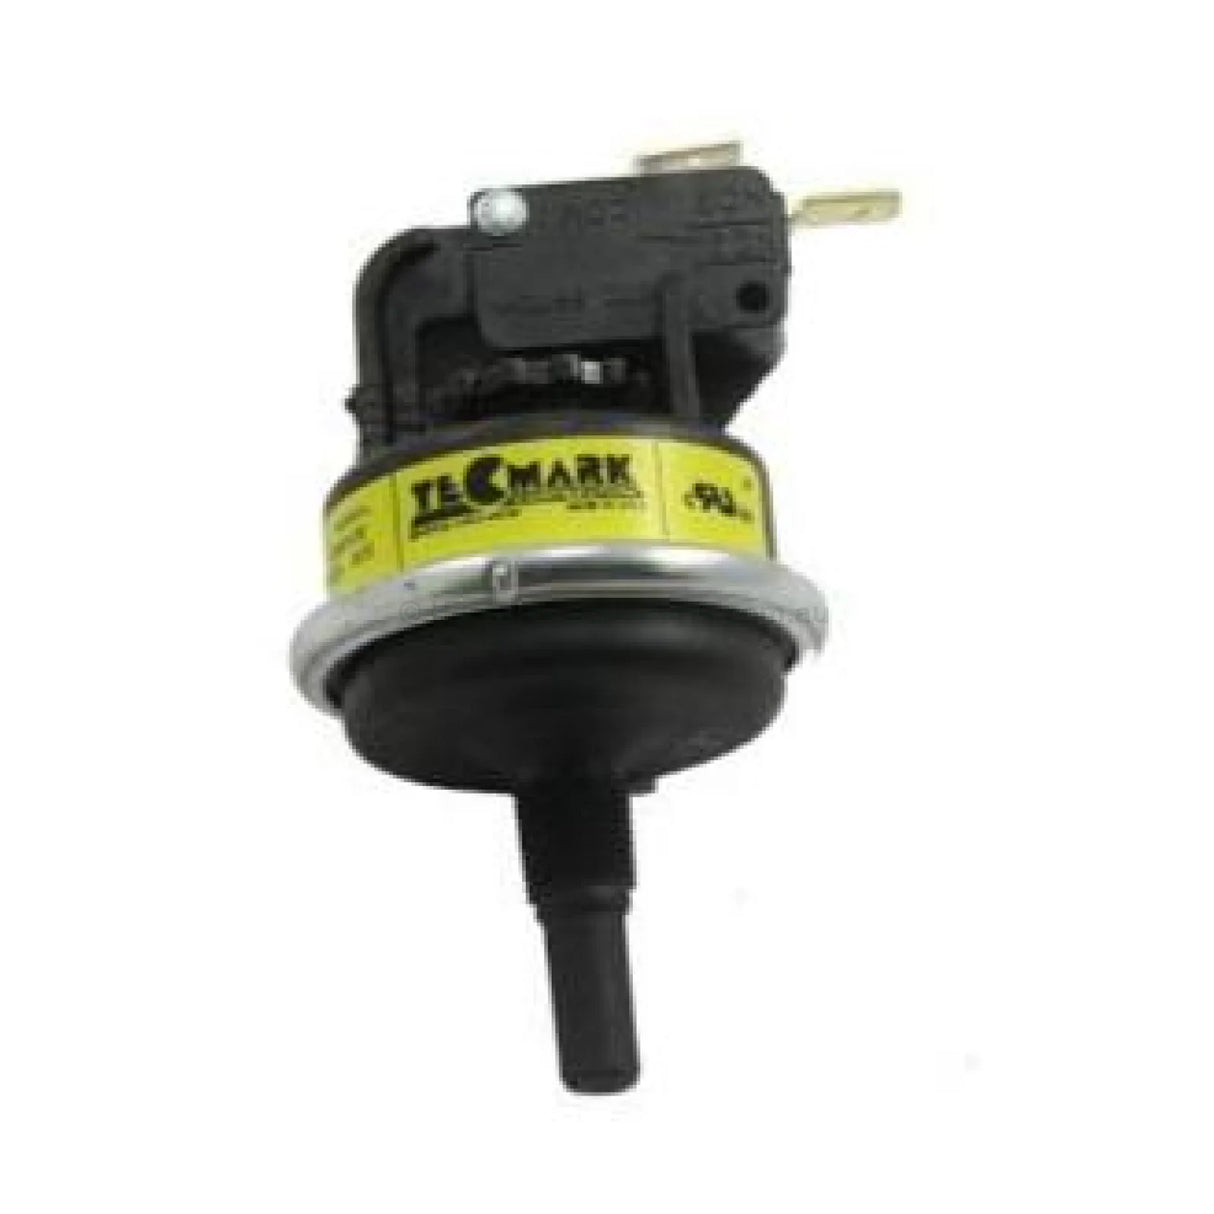 Tecmark & Hydroquip Water Pressure Switch - Pentair Raypak and Others - Heater and Spa Parts